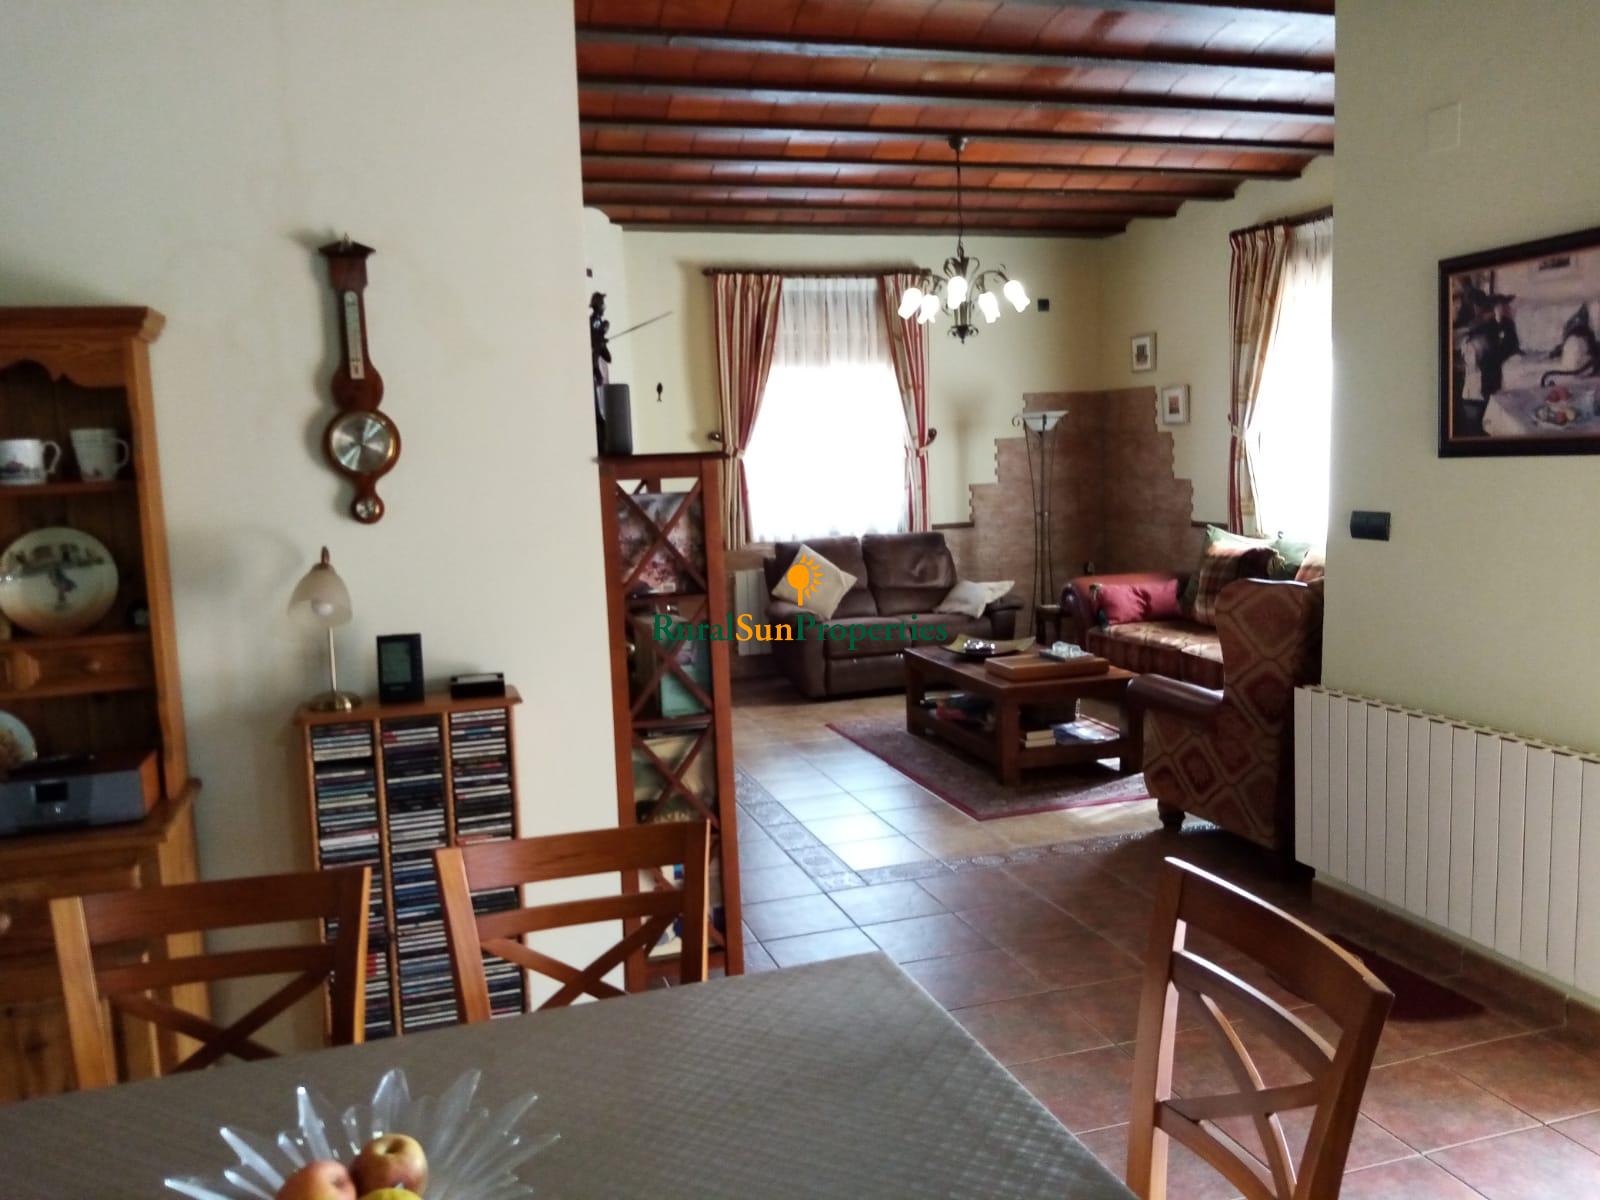 SOLD. Nice country house for sale in Cehegin set on a plot of 8,000 sq.m